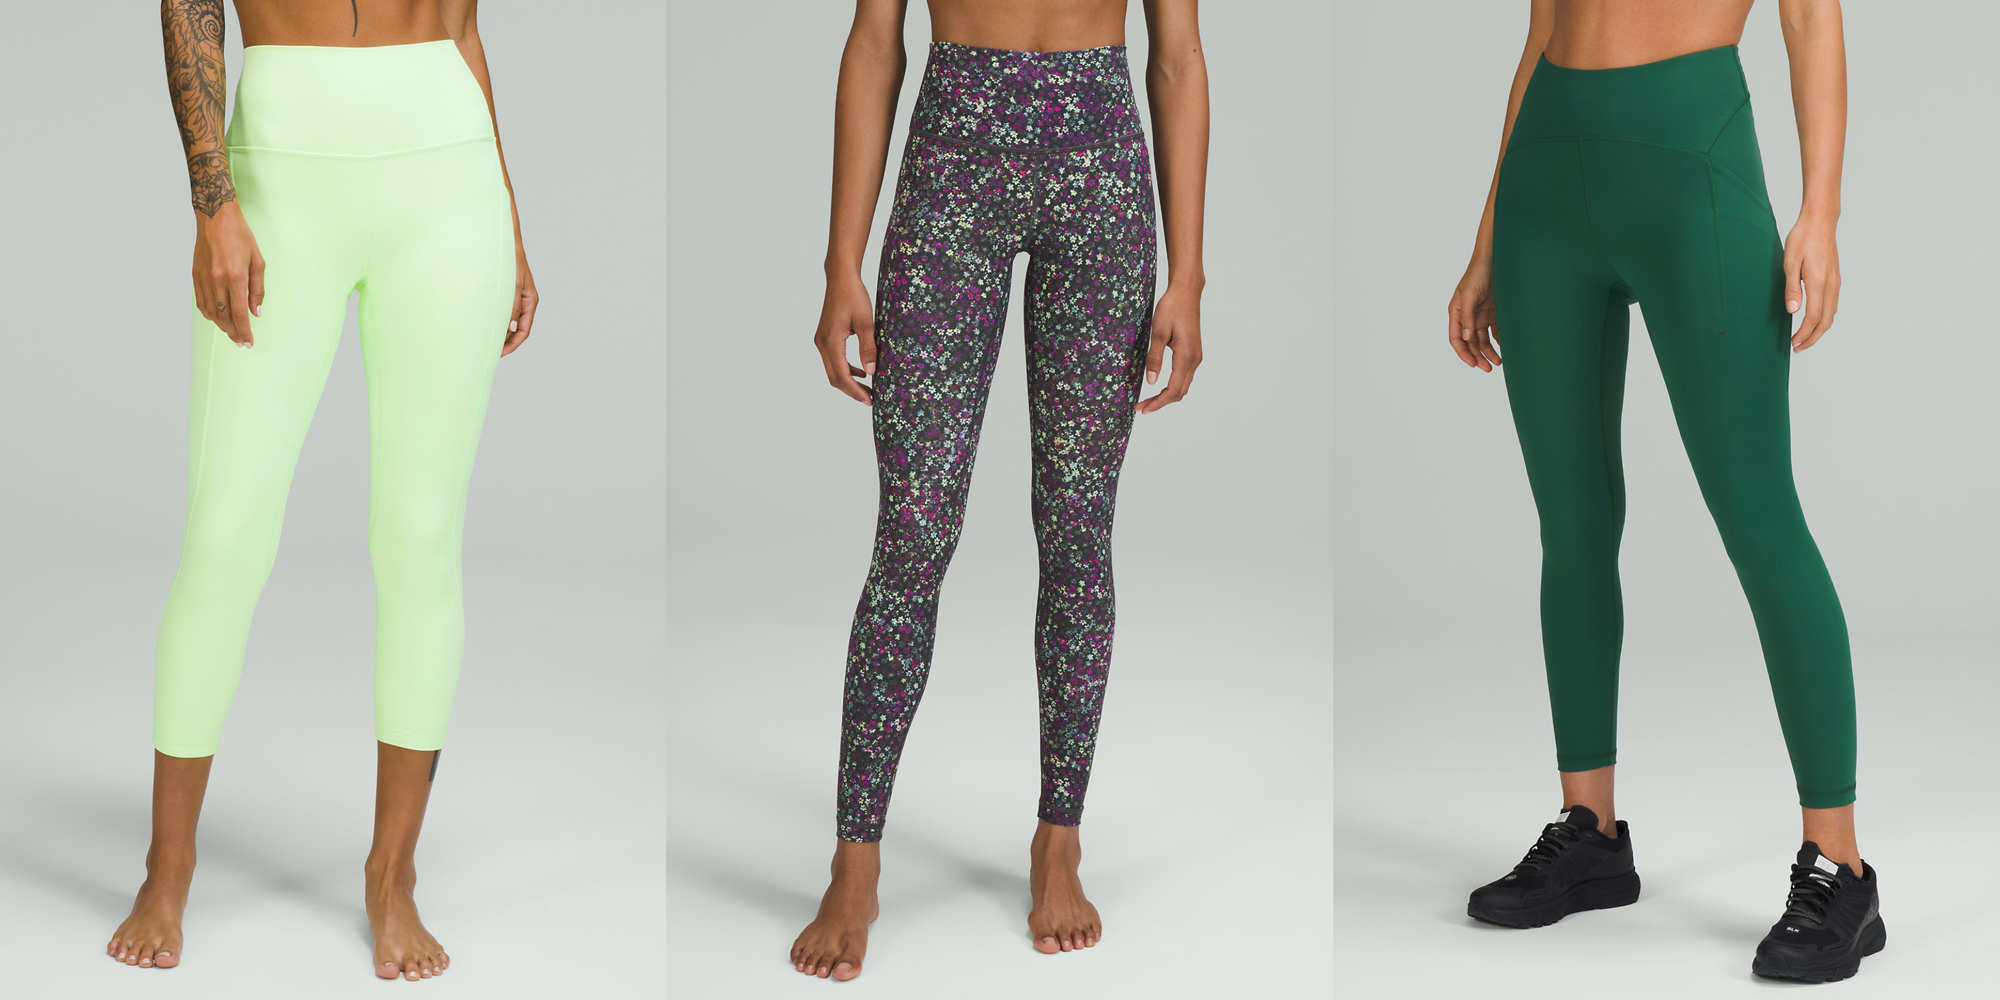 Shop 11 of the top picks from Lululemon's We Made Too Much page